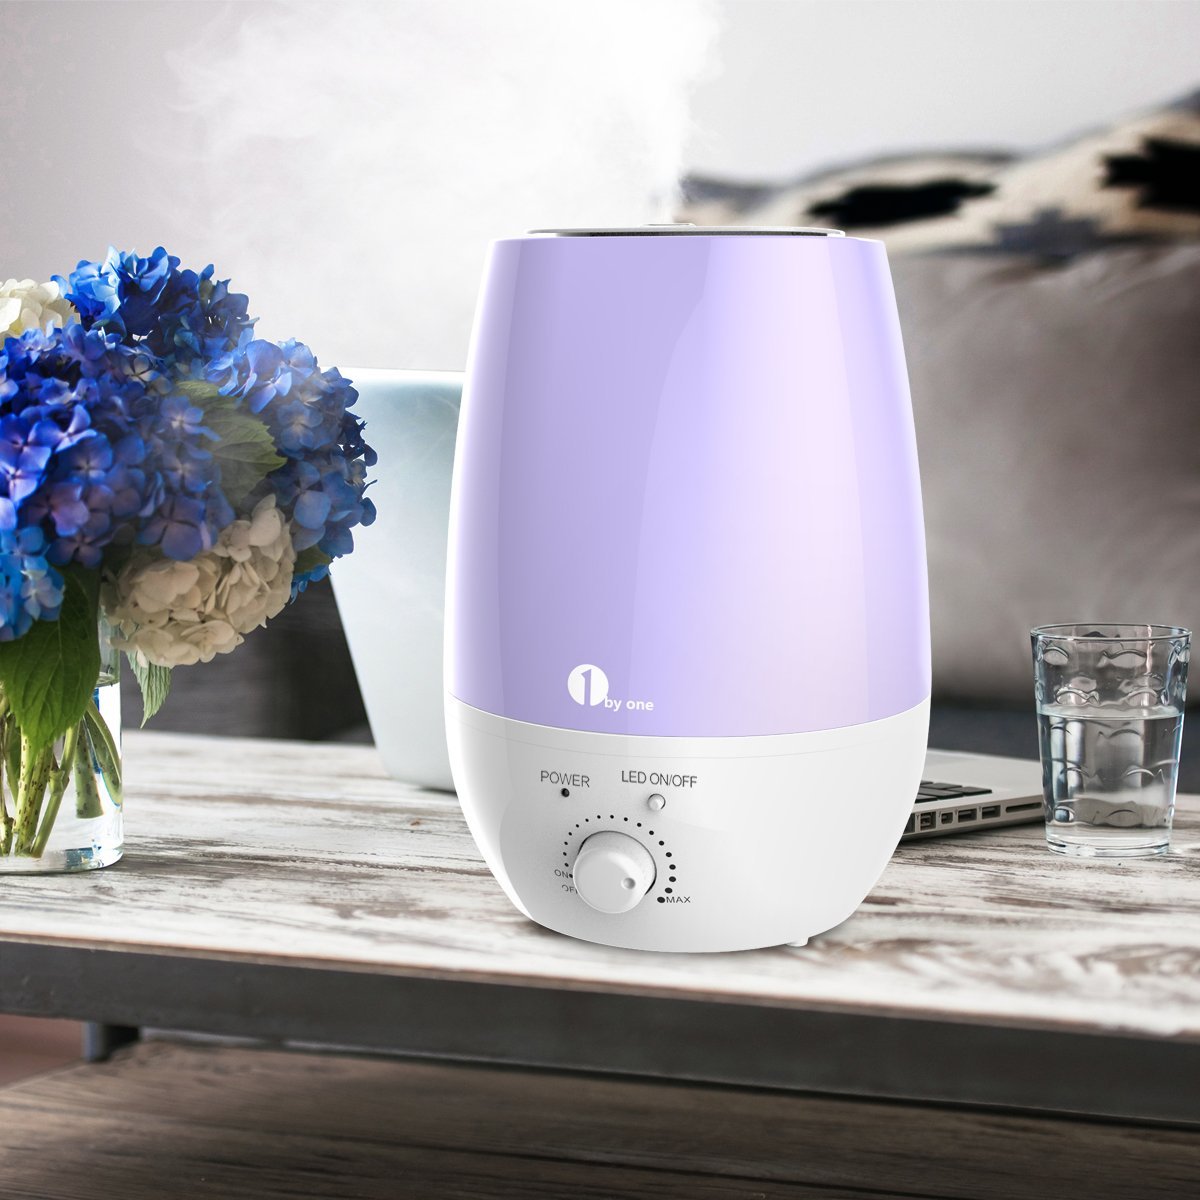 Breathe better with 1byone’s Ultrasonic Cool Mist Humidifier